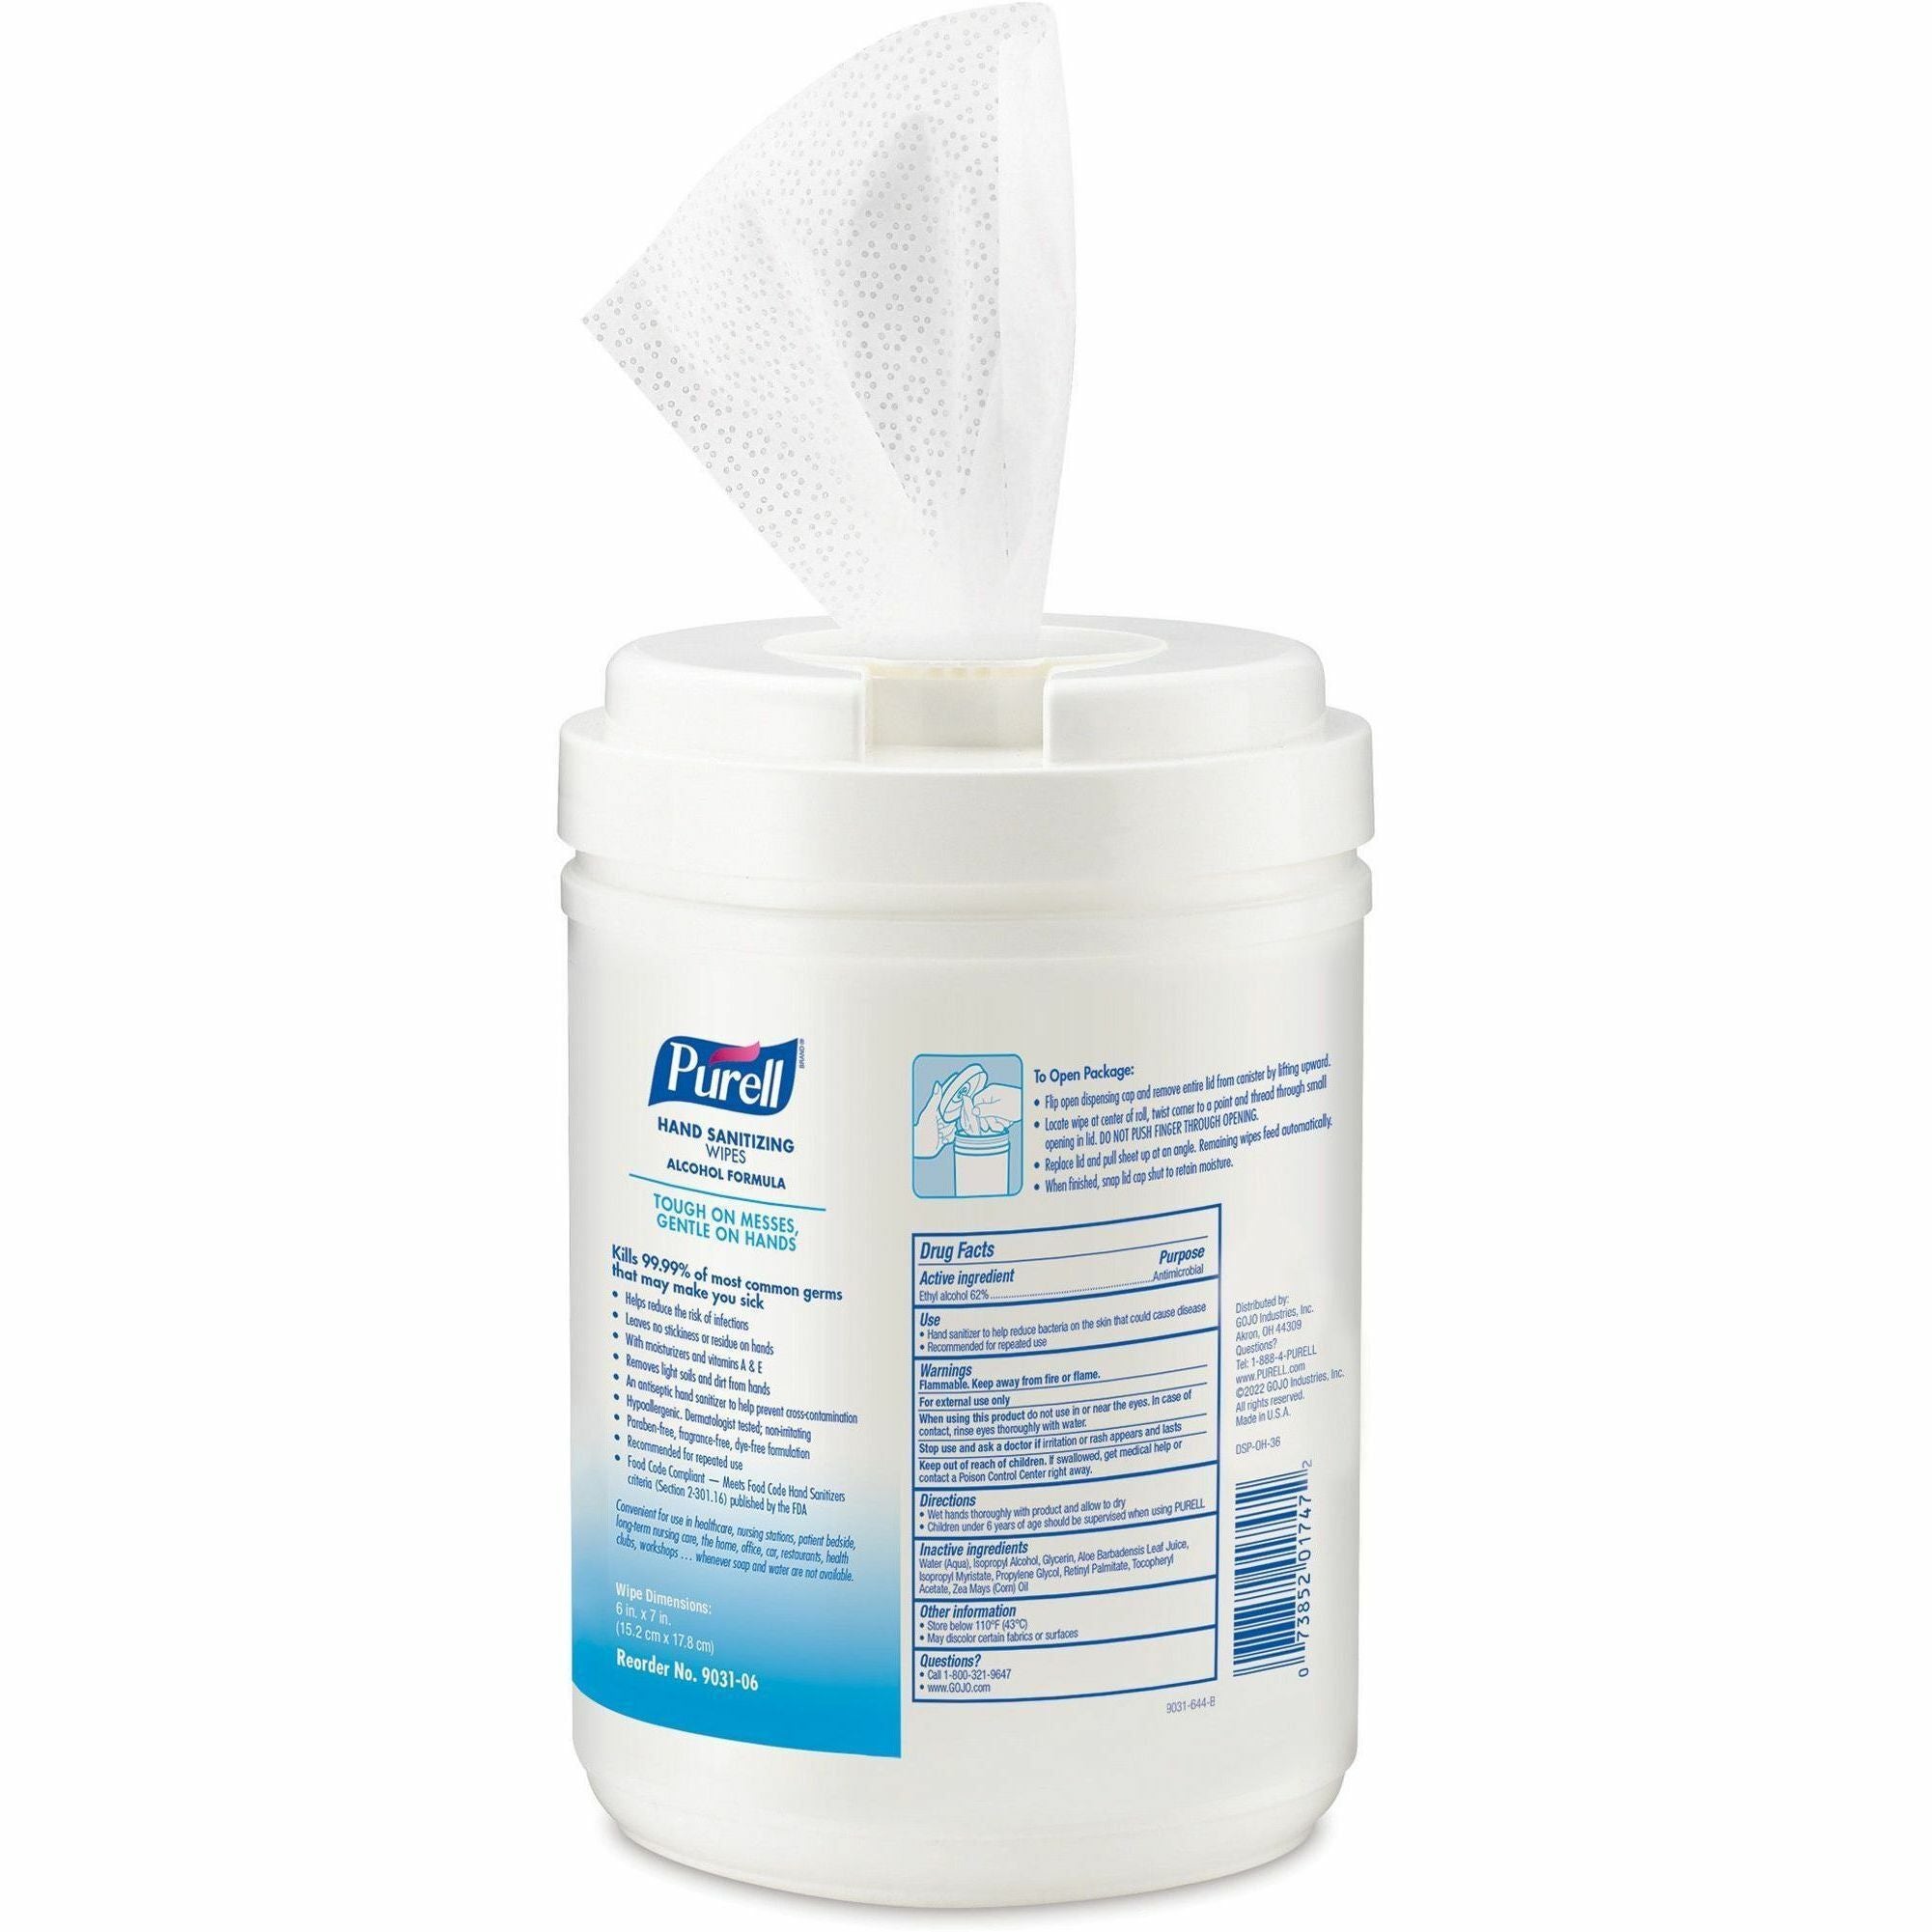 purell-alcohol-hand-sanitizing-wipes-6-x-7-white-residue-free-dye-free-fragrance-free-non-sticky-non-irritating-non-irritating-hypoallergenic-durable-pre-moistened-lint-free-textured-for-hand-175-per-canister-6-carton_goj903106ct - 2